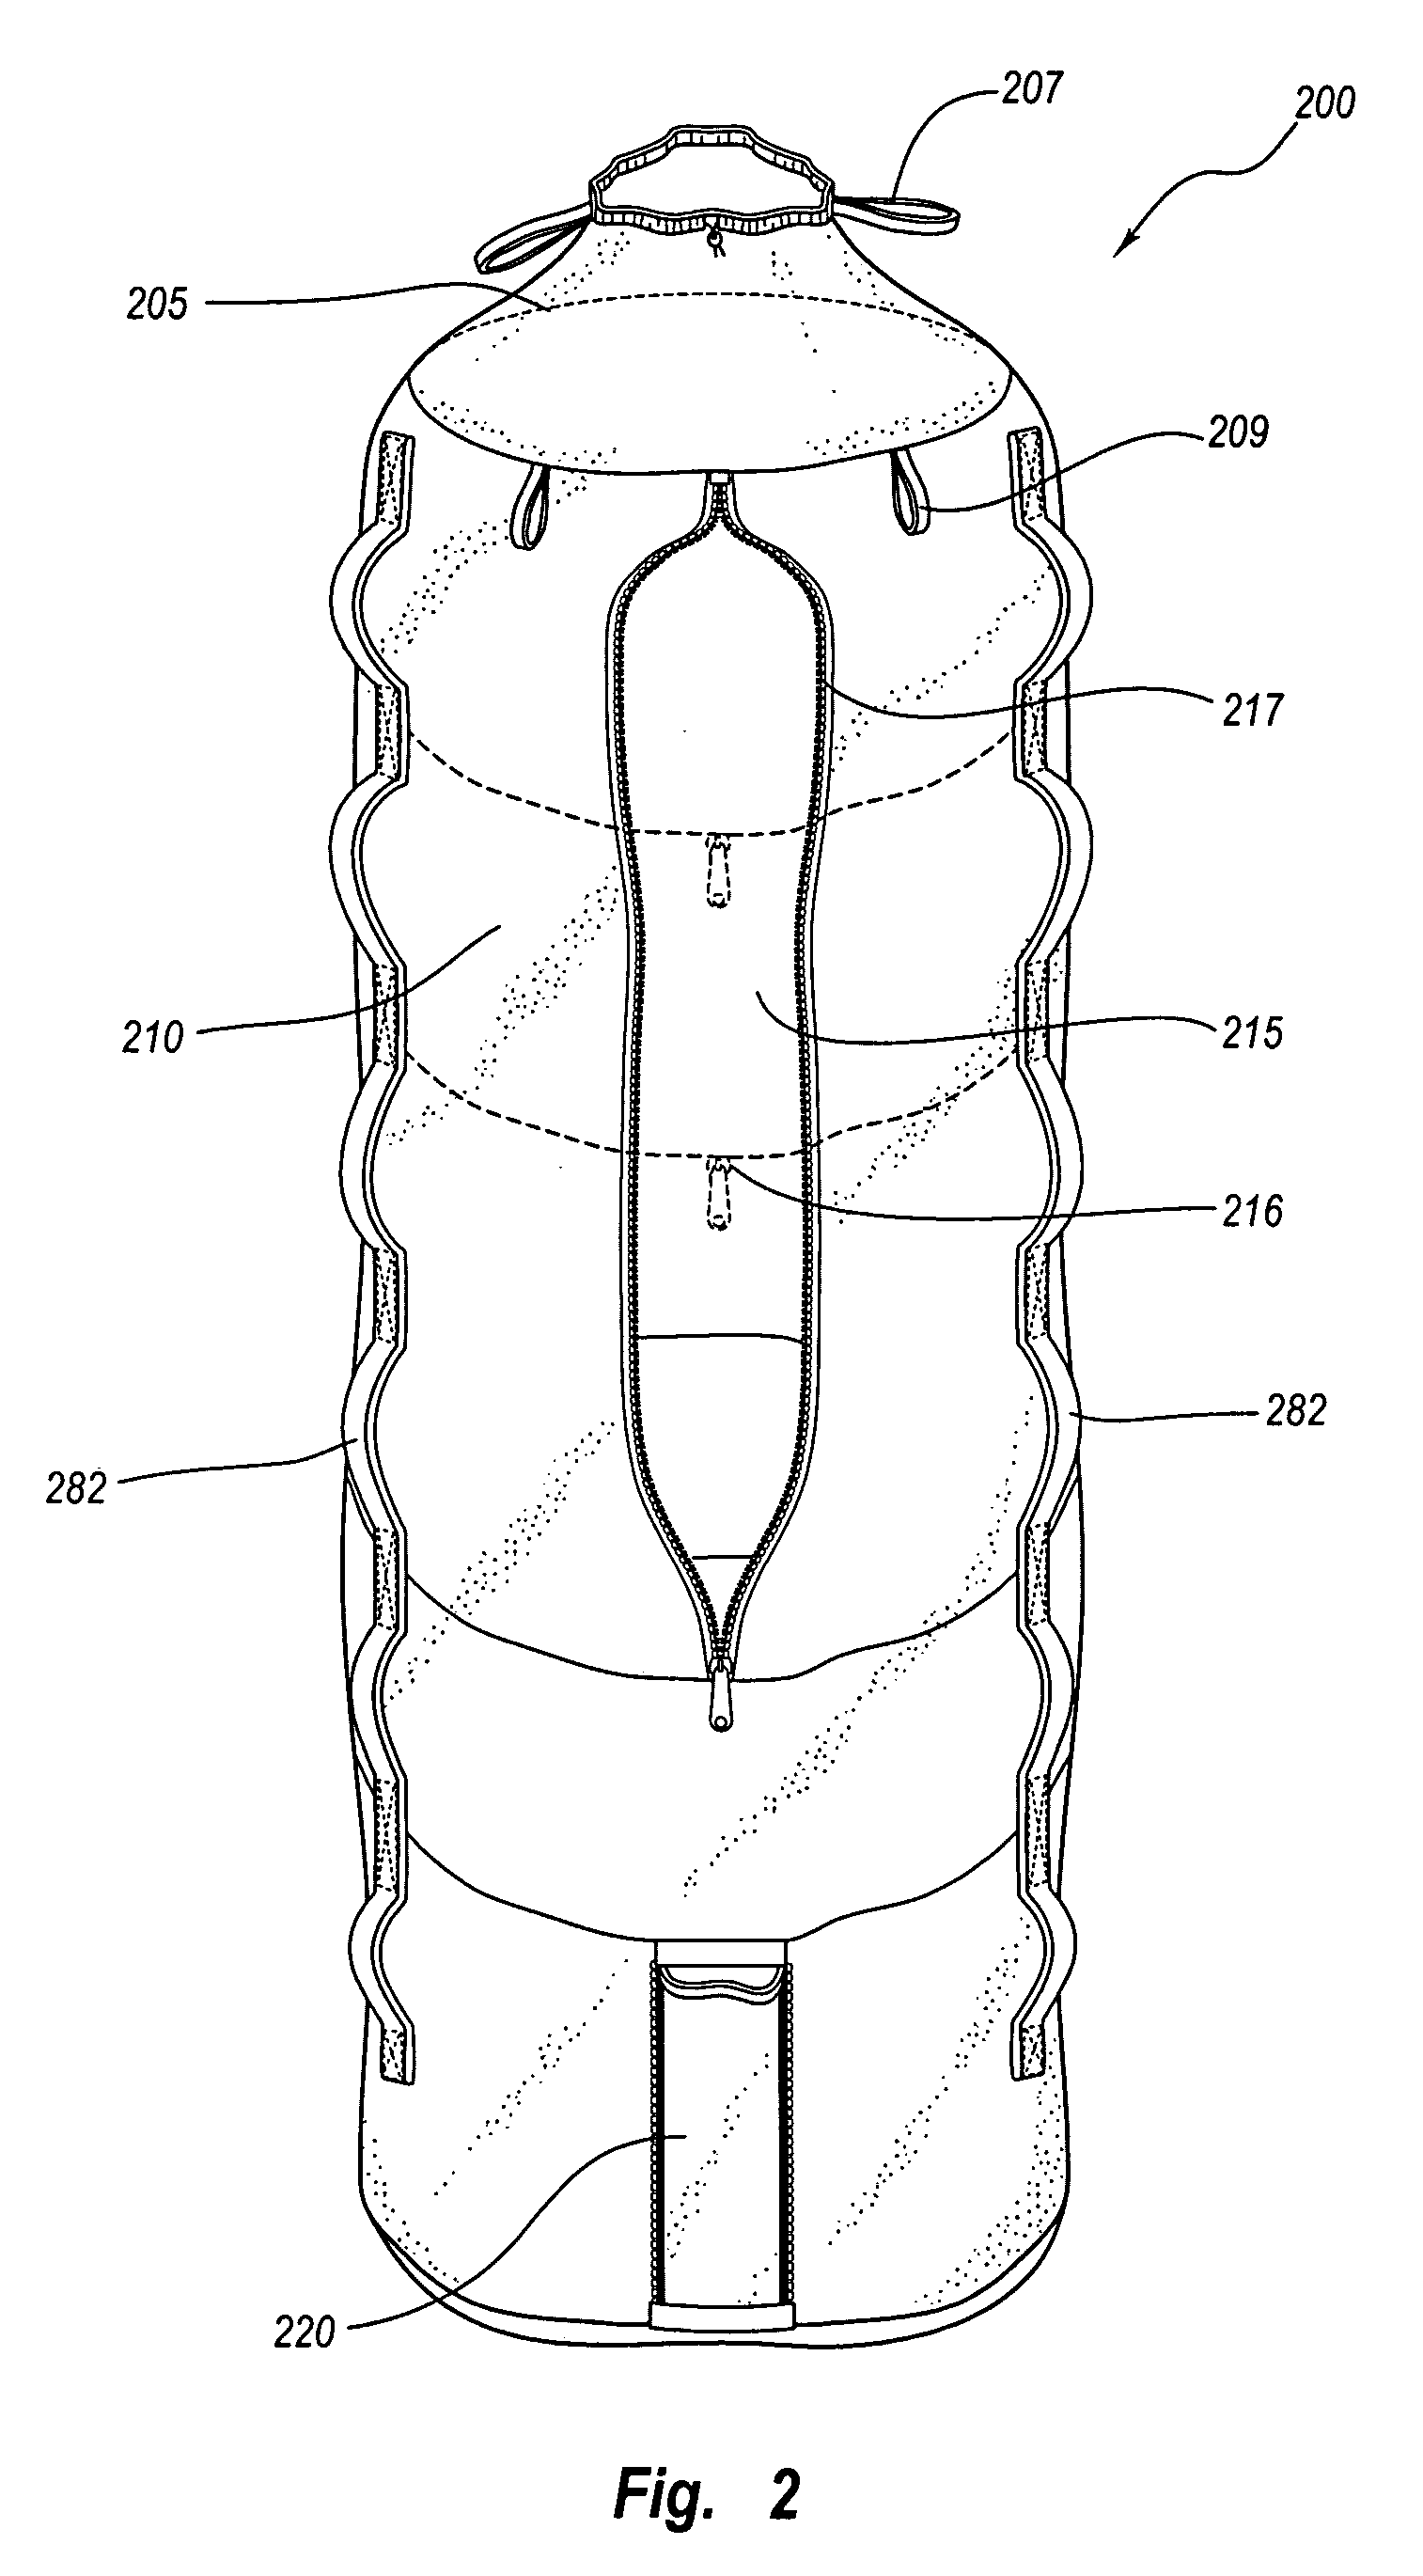 Tree support and cover system